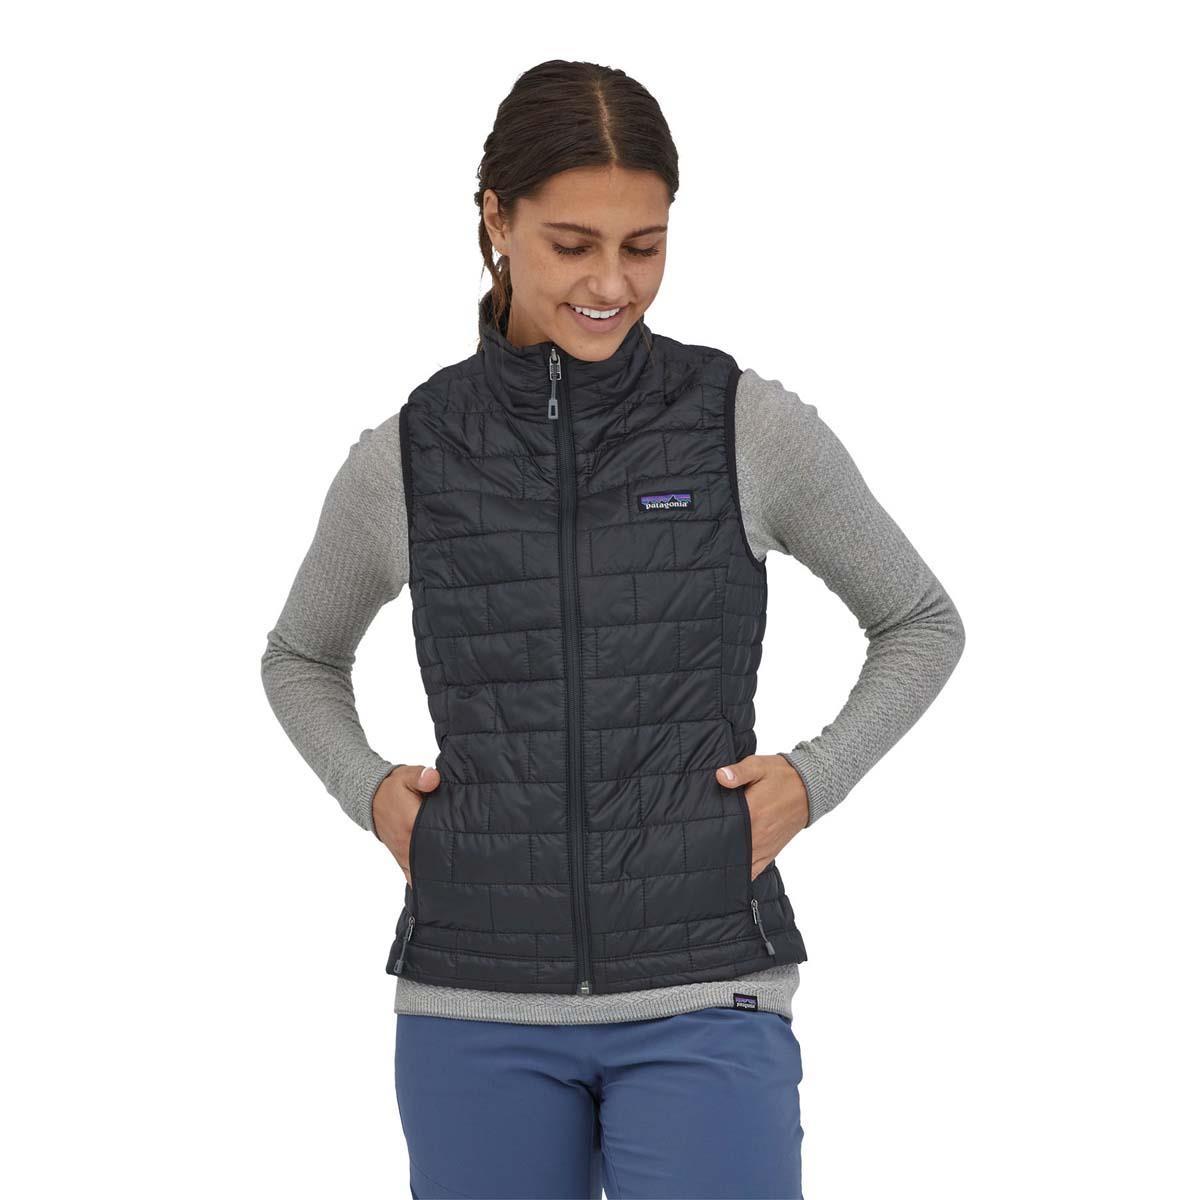 Patagonia Men's Nano Puff Vest - ONLY AVAILABLE IN A SIZE SMALL